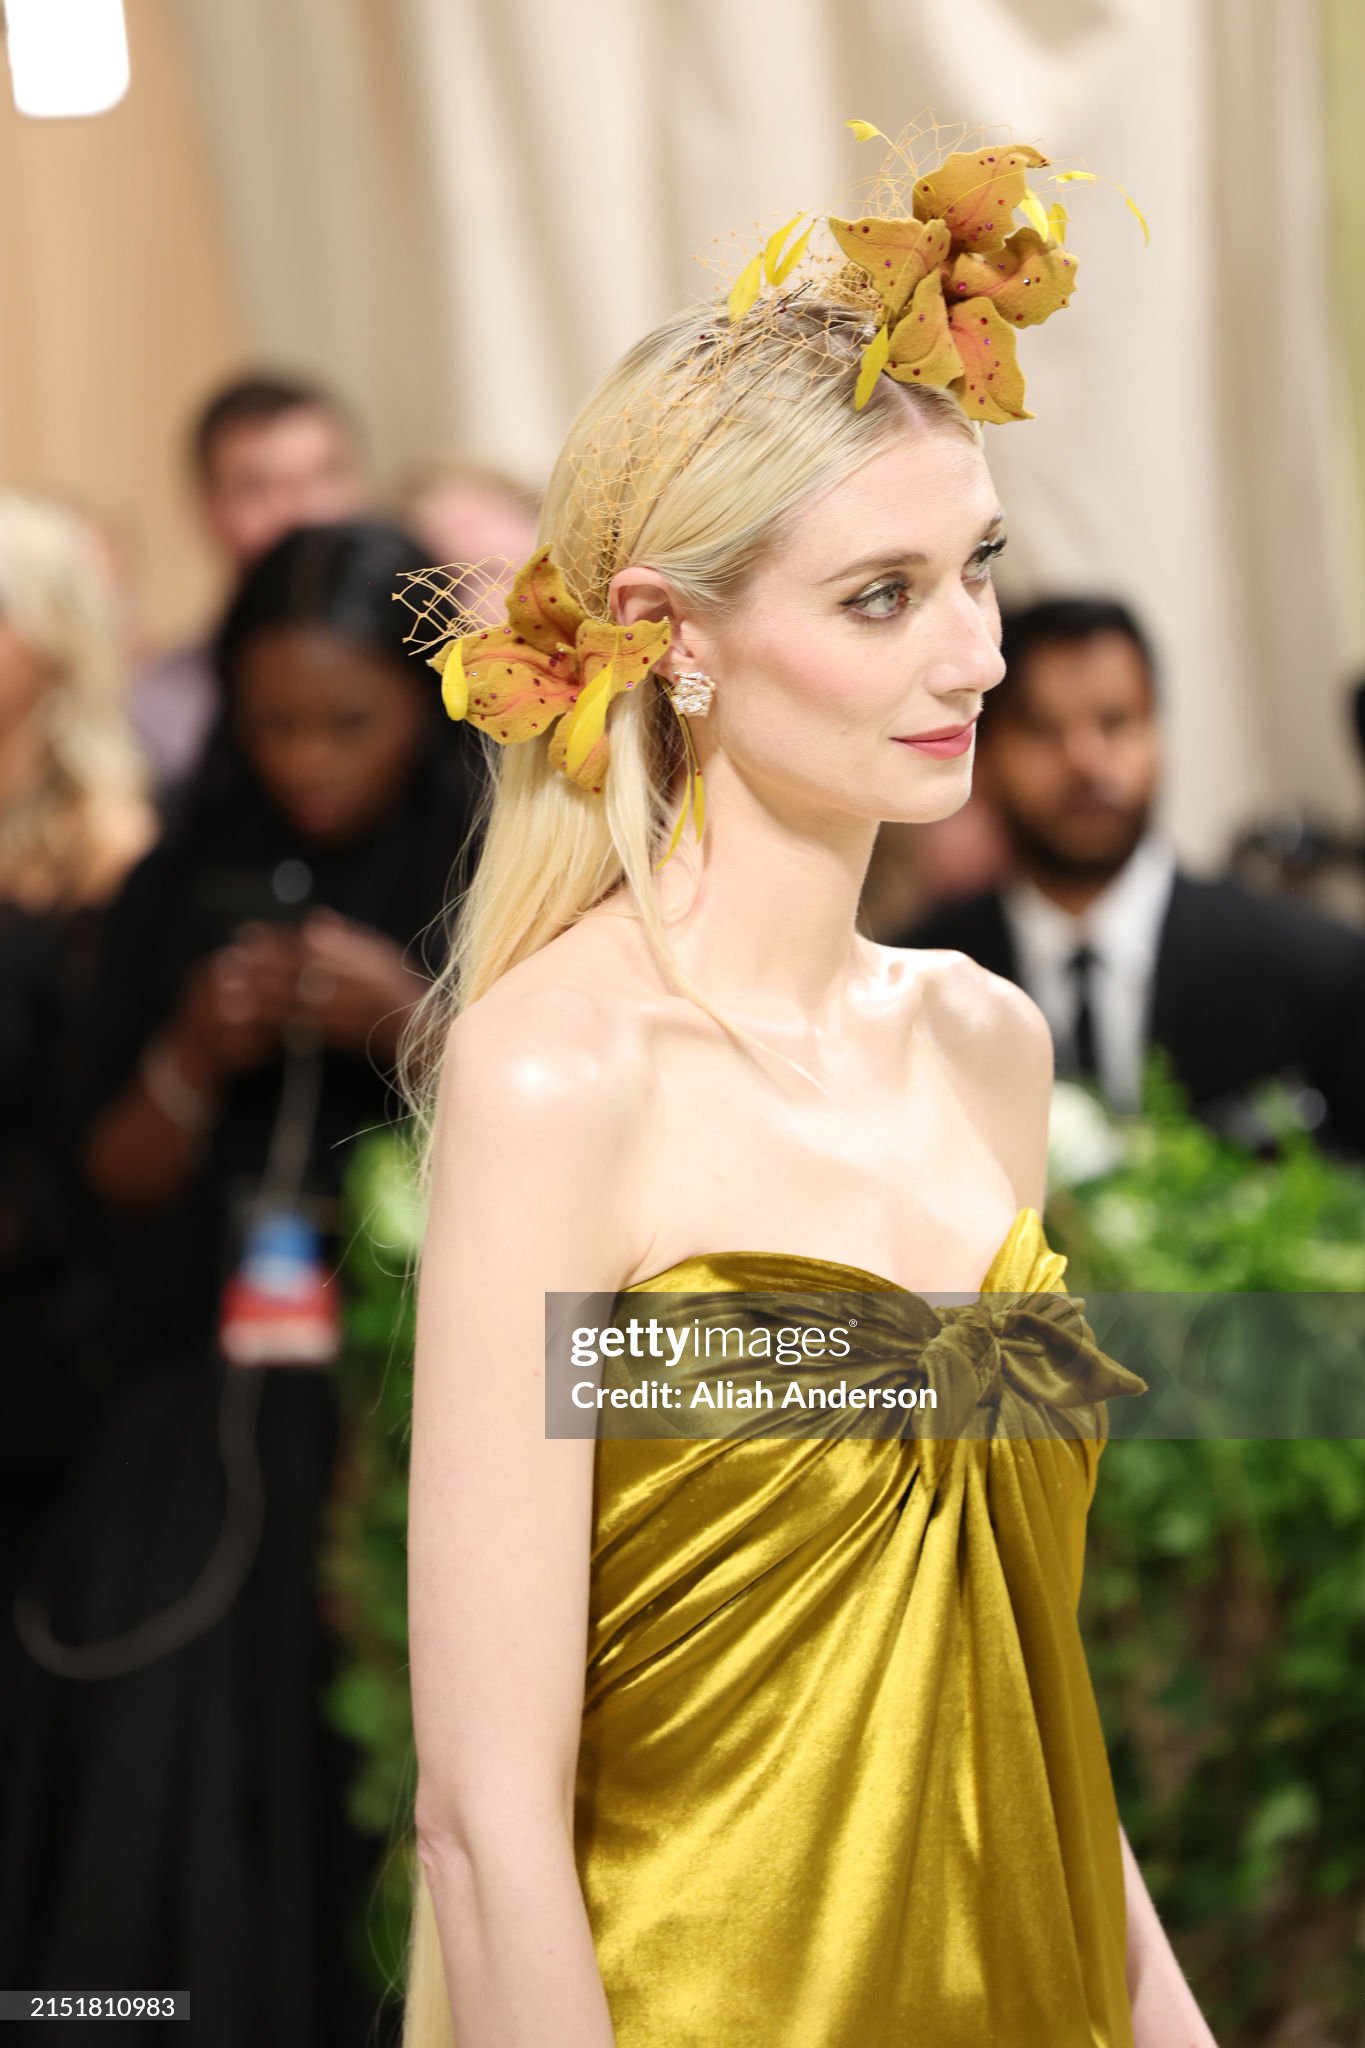 gettyimages-2151810983-2048x2048.jpg